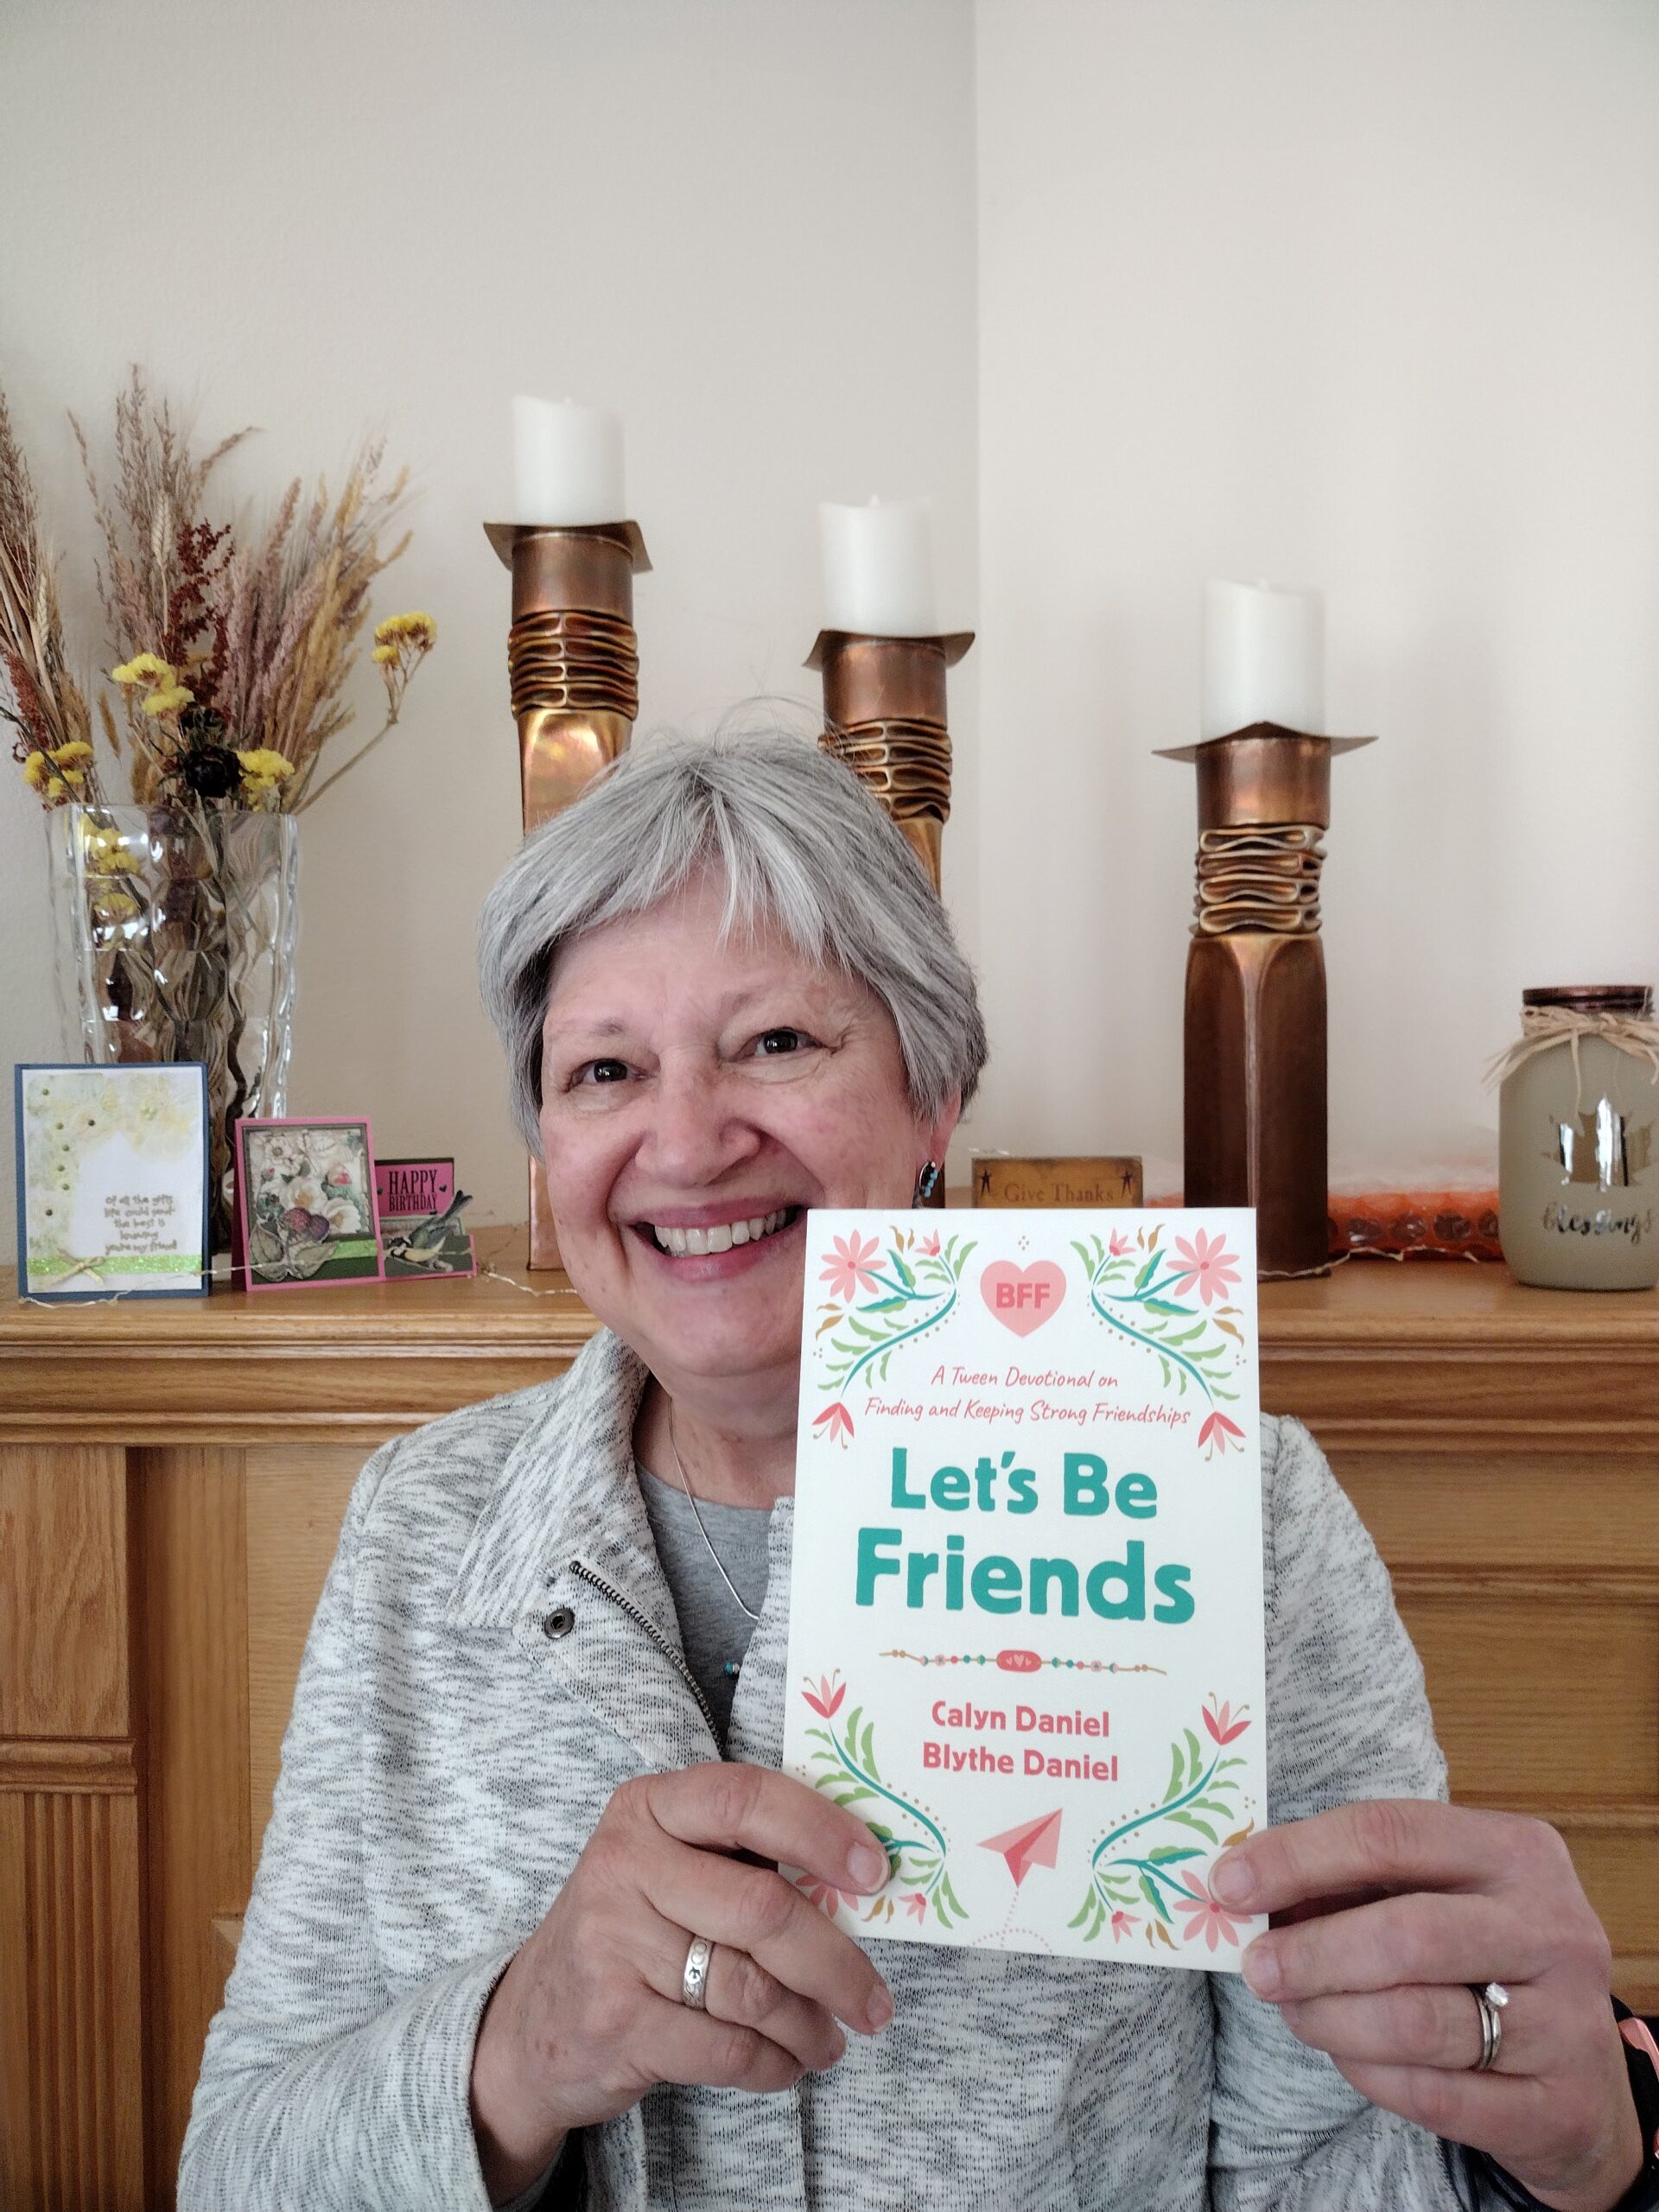 “Let’s Be Friends” Book Giveaway!